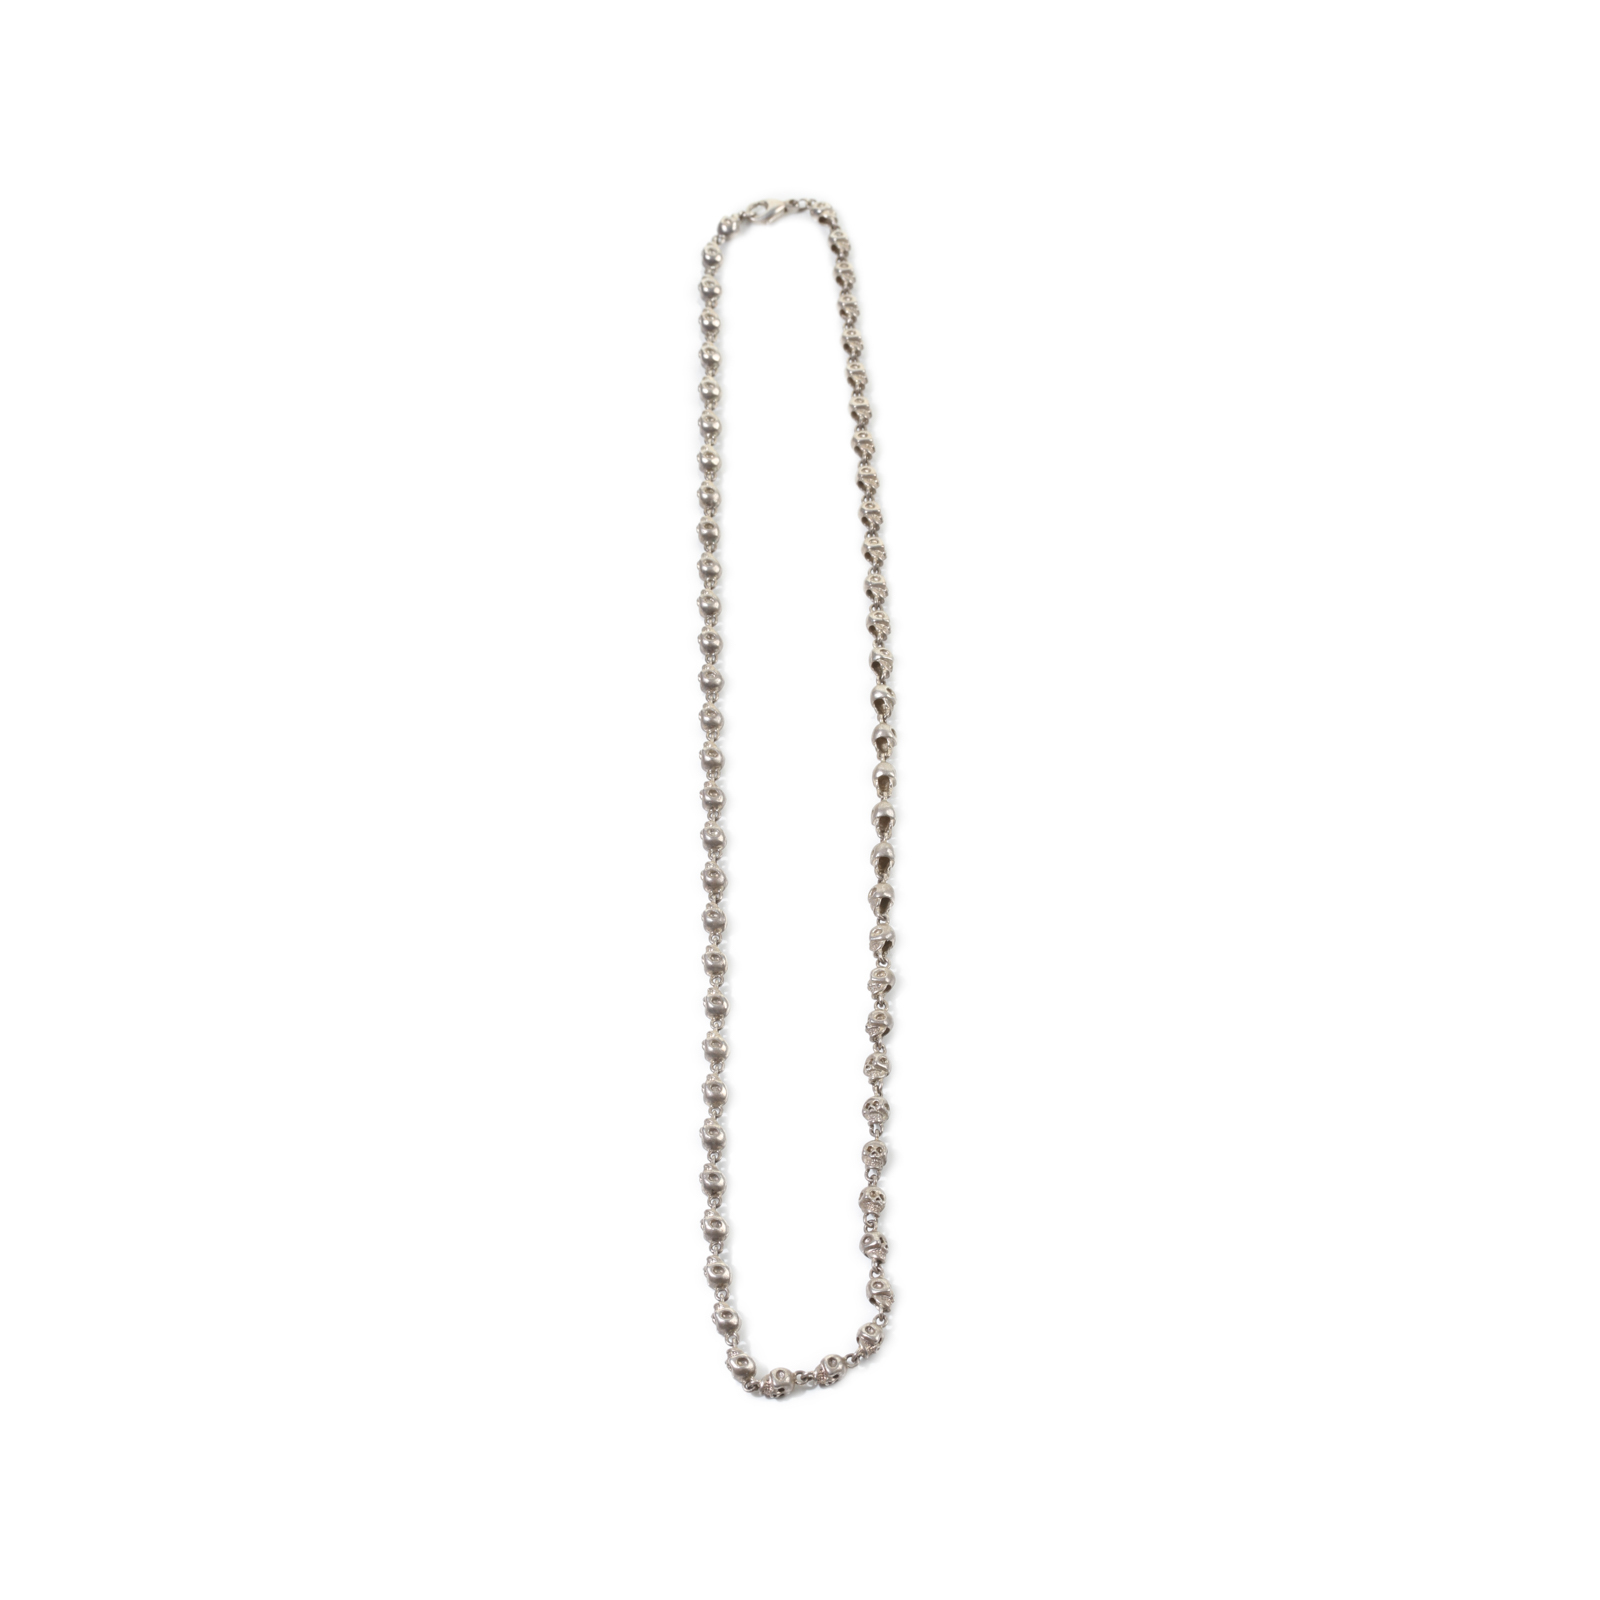 Sterling Silver Skull Chain Necklace by Jade Jagger - Le Dressing Monaco